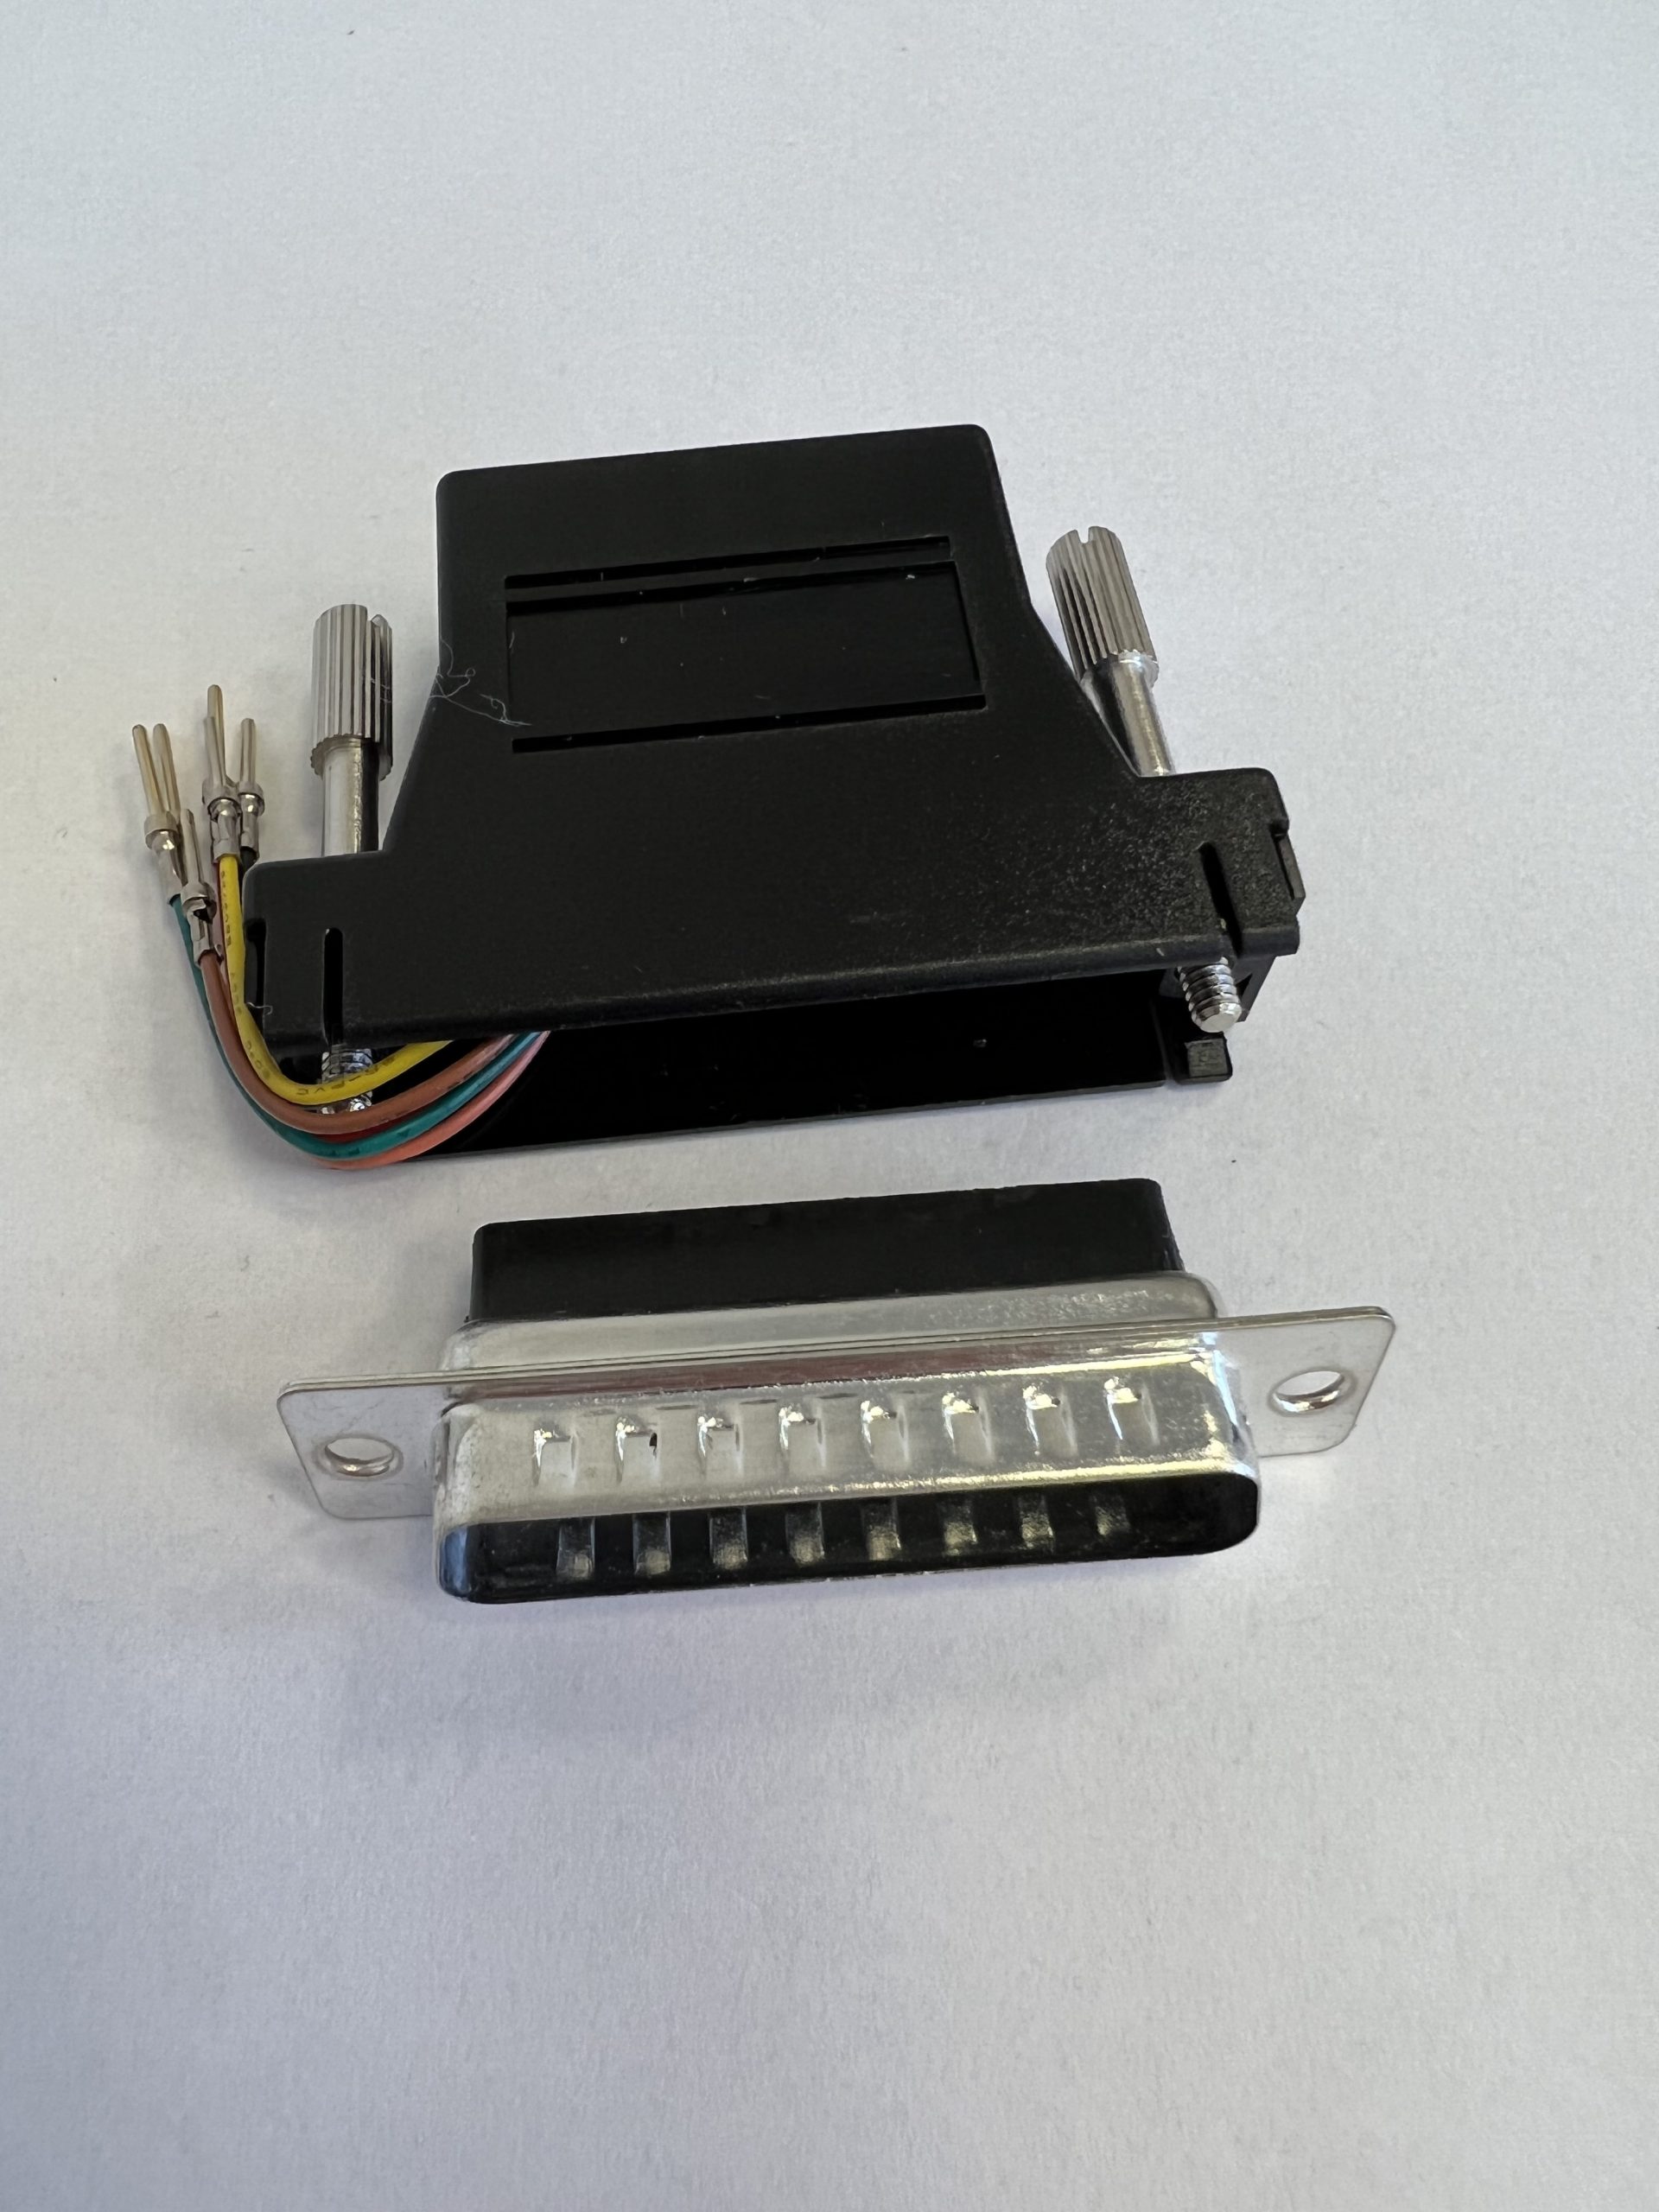 Unshielded RJ12 to Sub D Modular Adaptor kits, equipped with male connectors